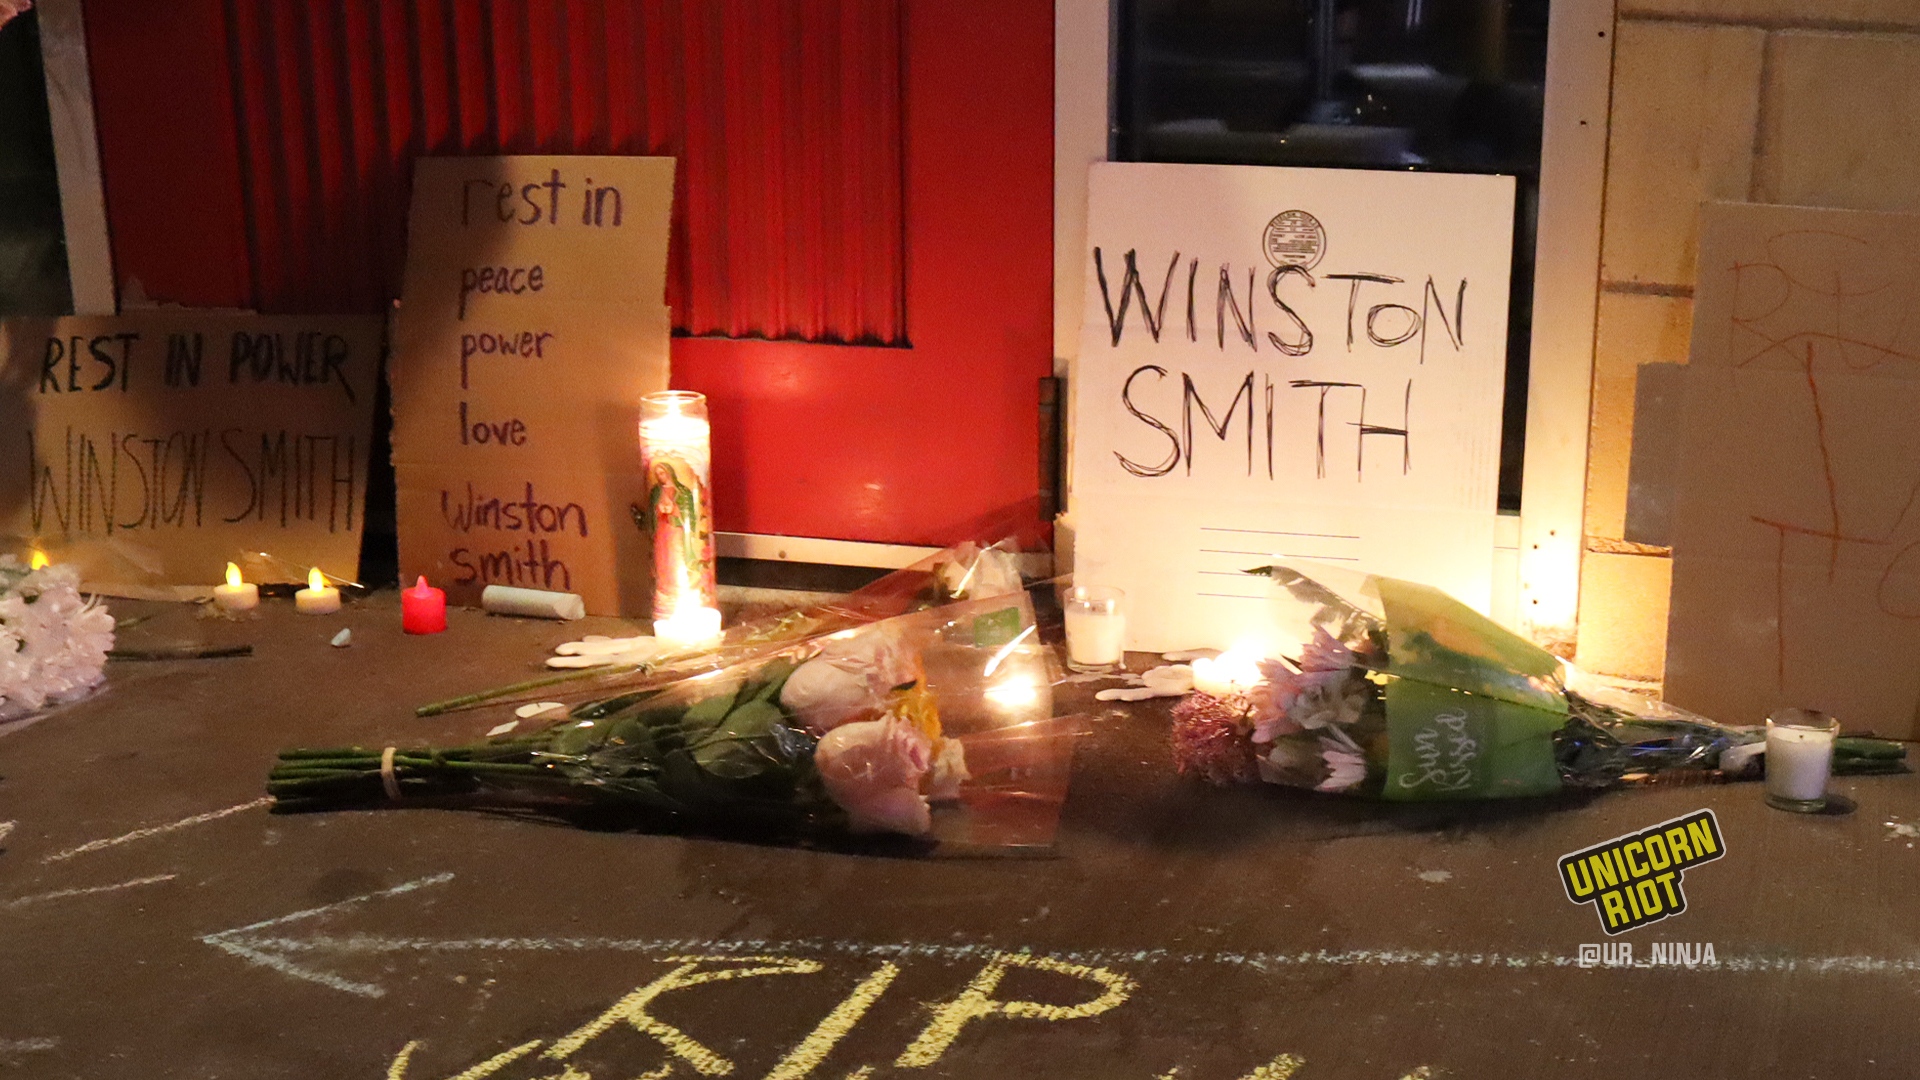 Flowers and signs placed on the sidewalk near the parking ramp where Smith was killed - June 4, 2021